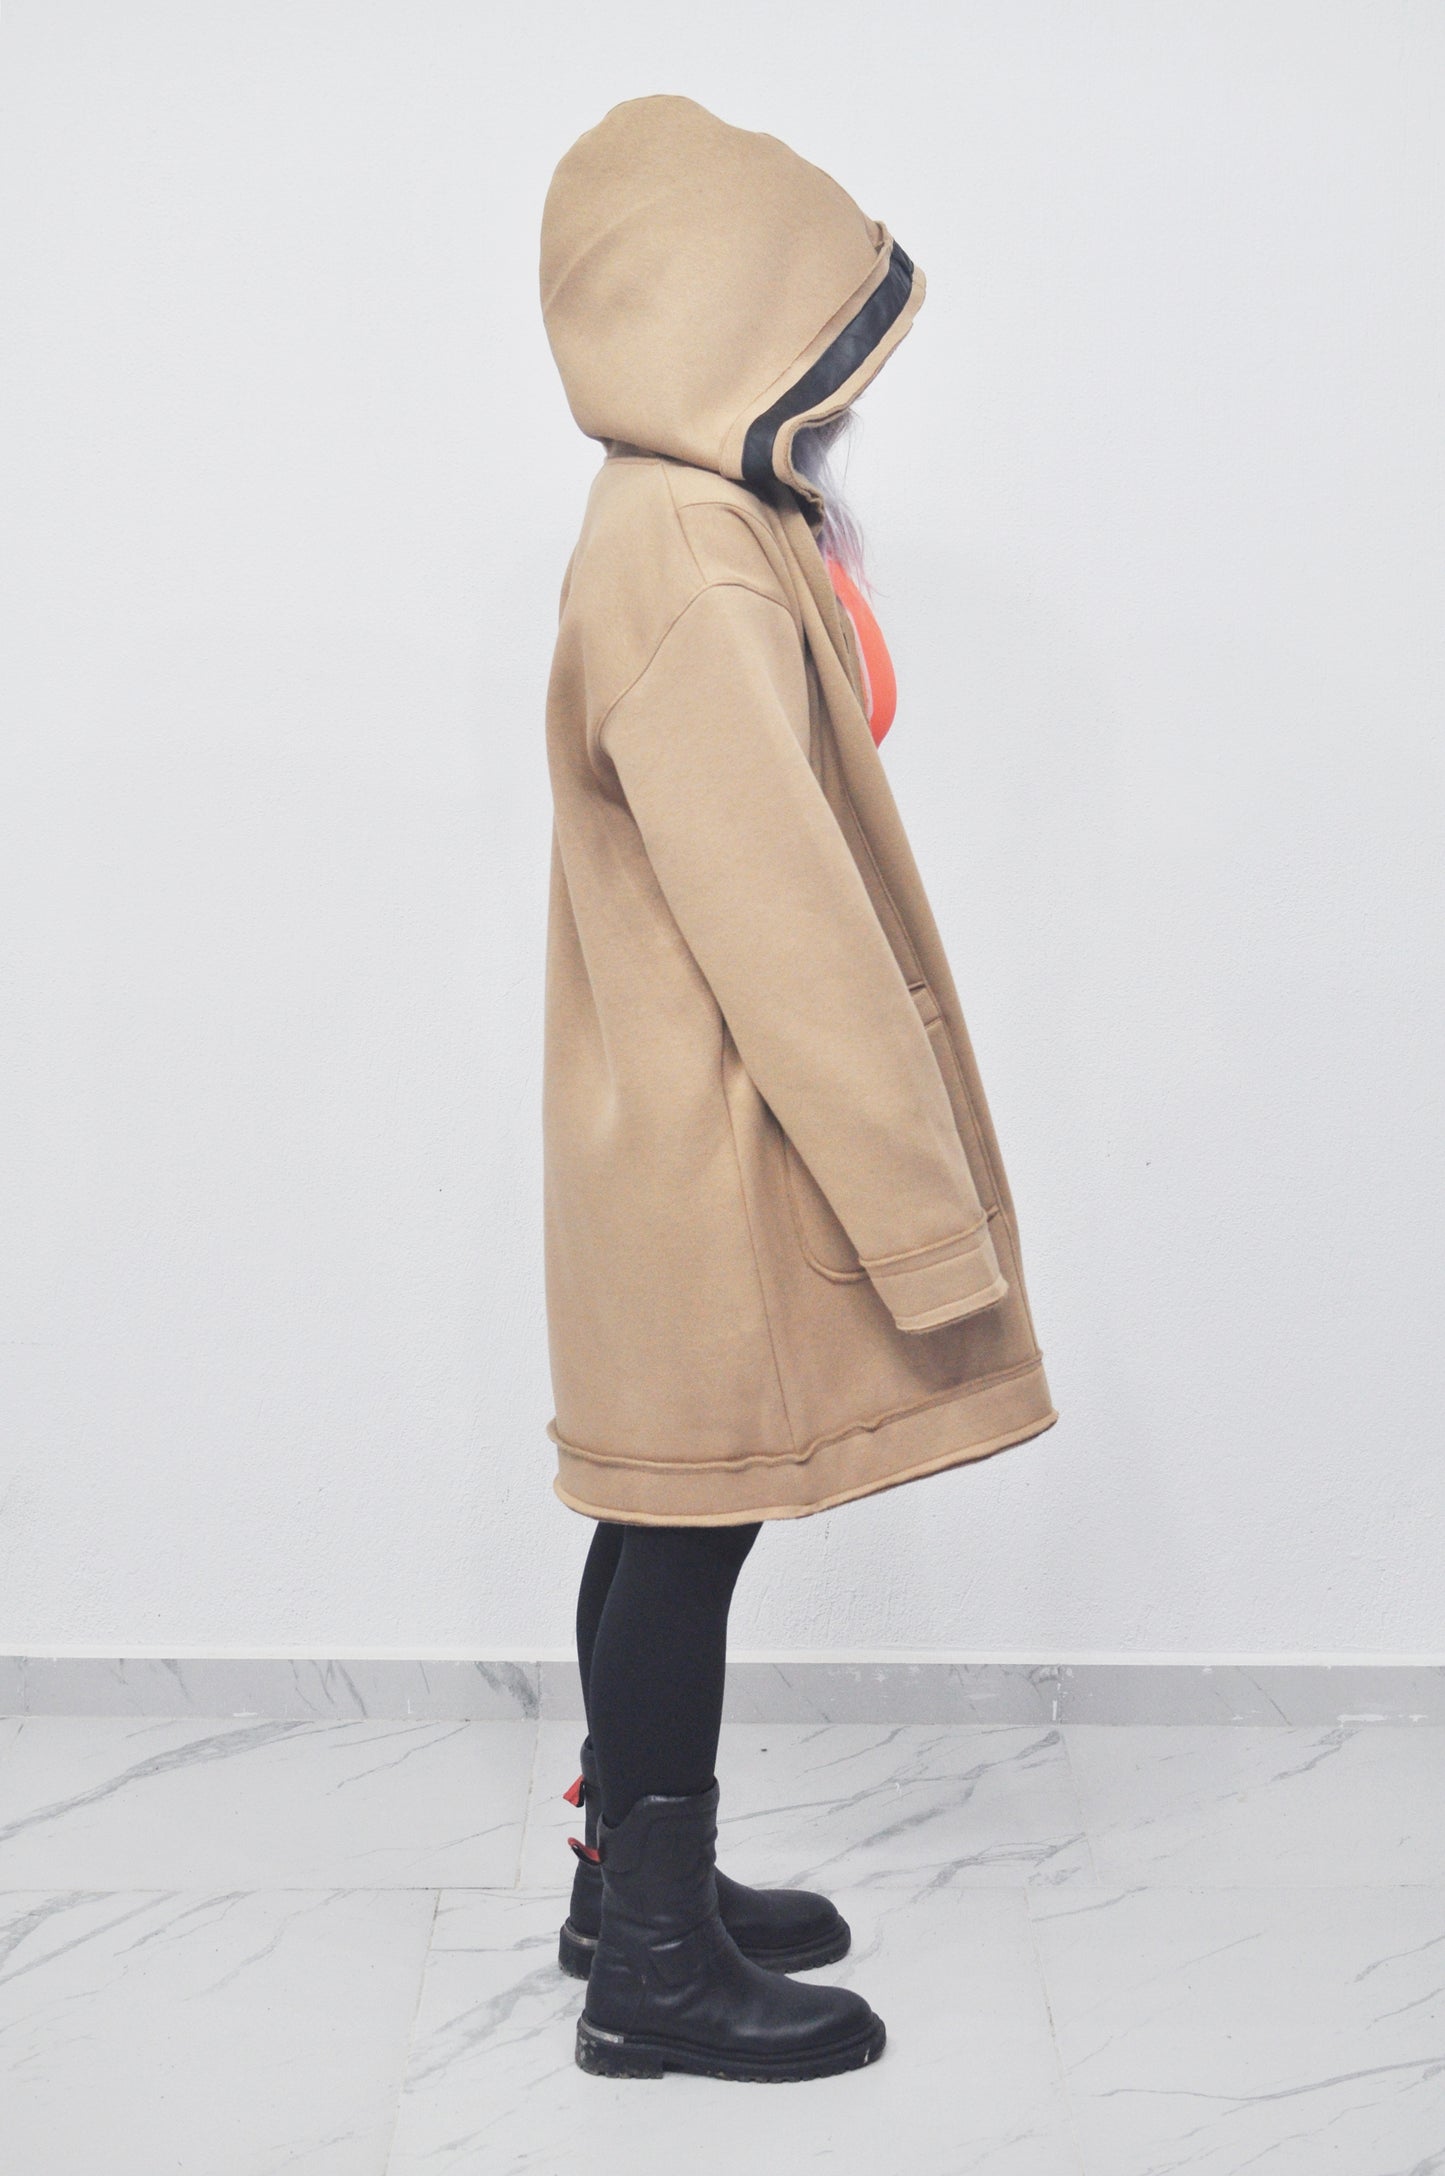 Oversized Asymmetrical Front Cut Long Hooded Leather Stitched Edge Cardigan / Cloak Cosplay Cape